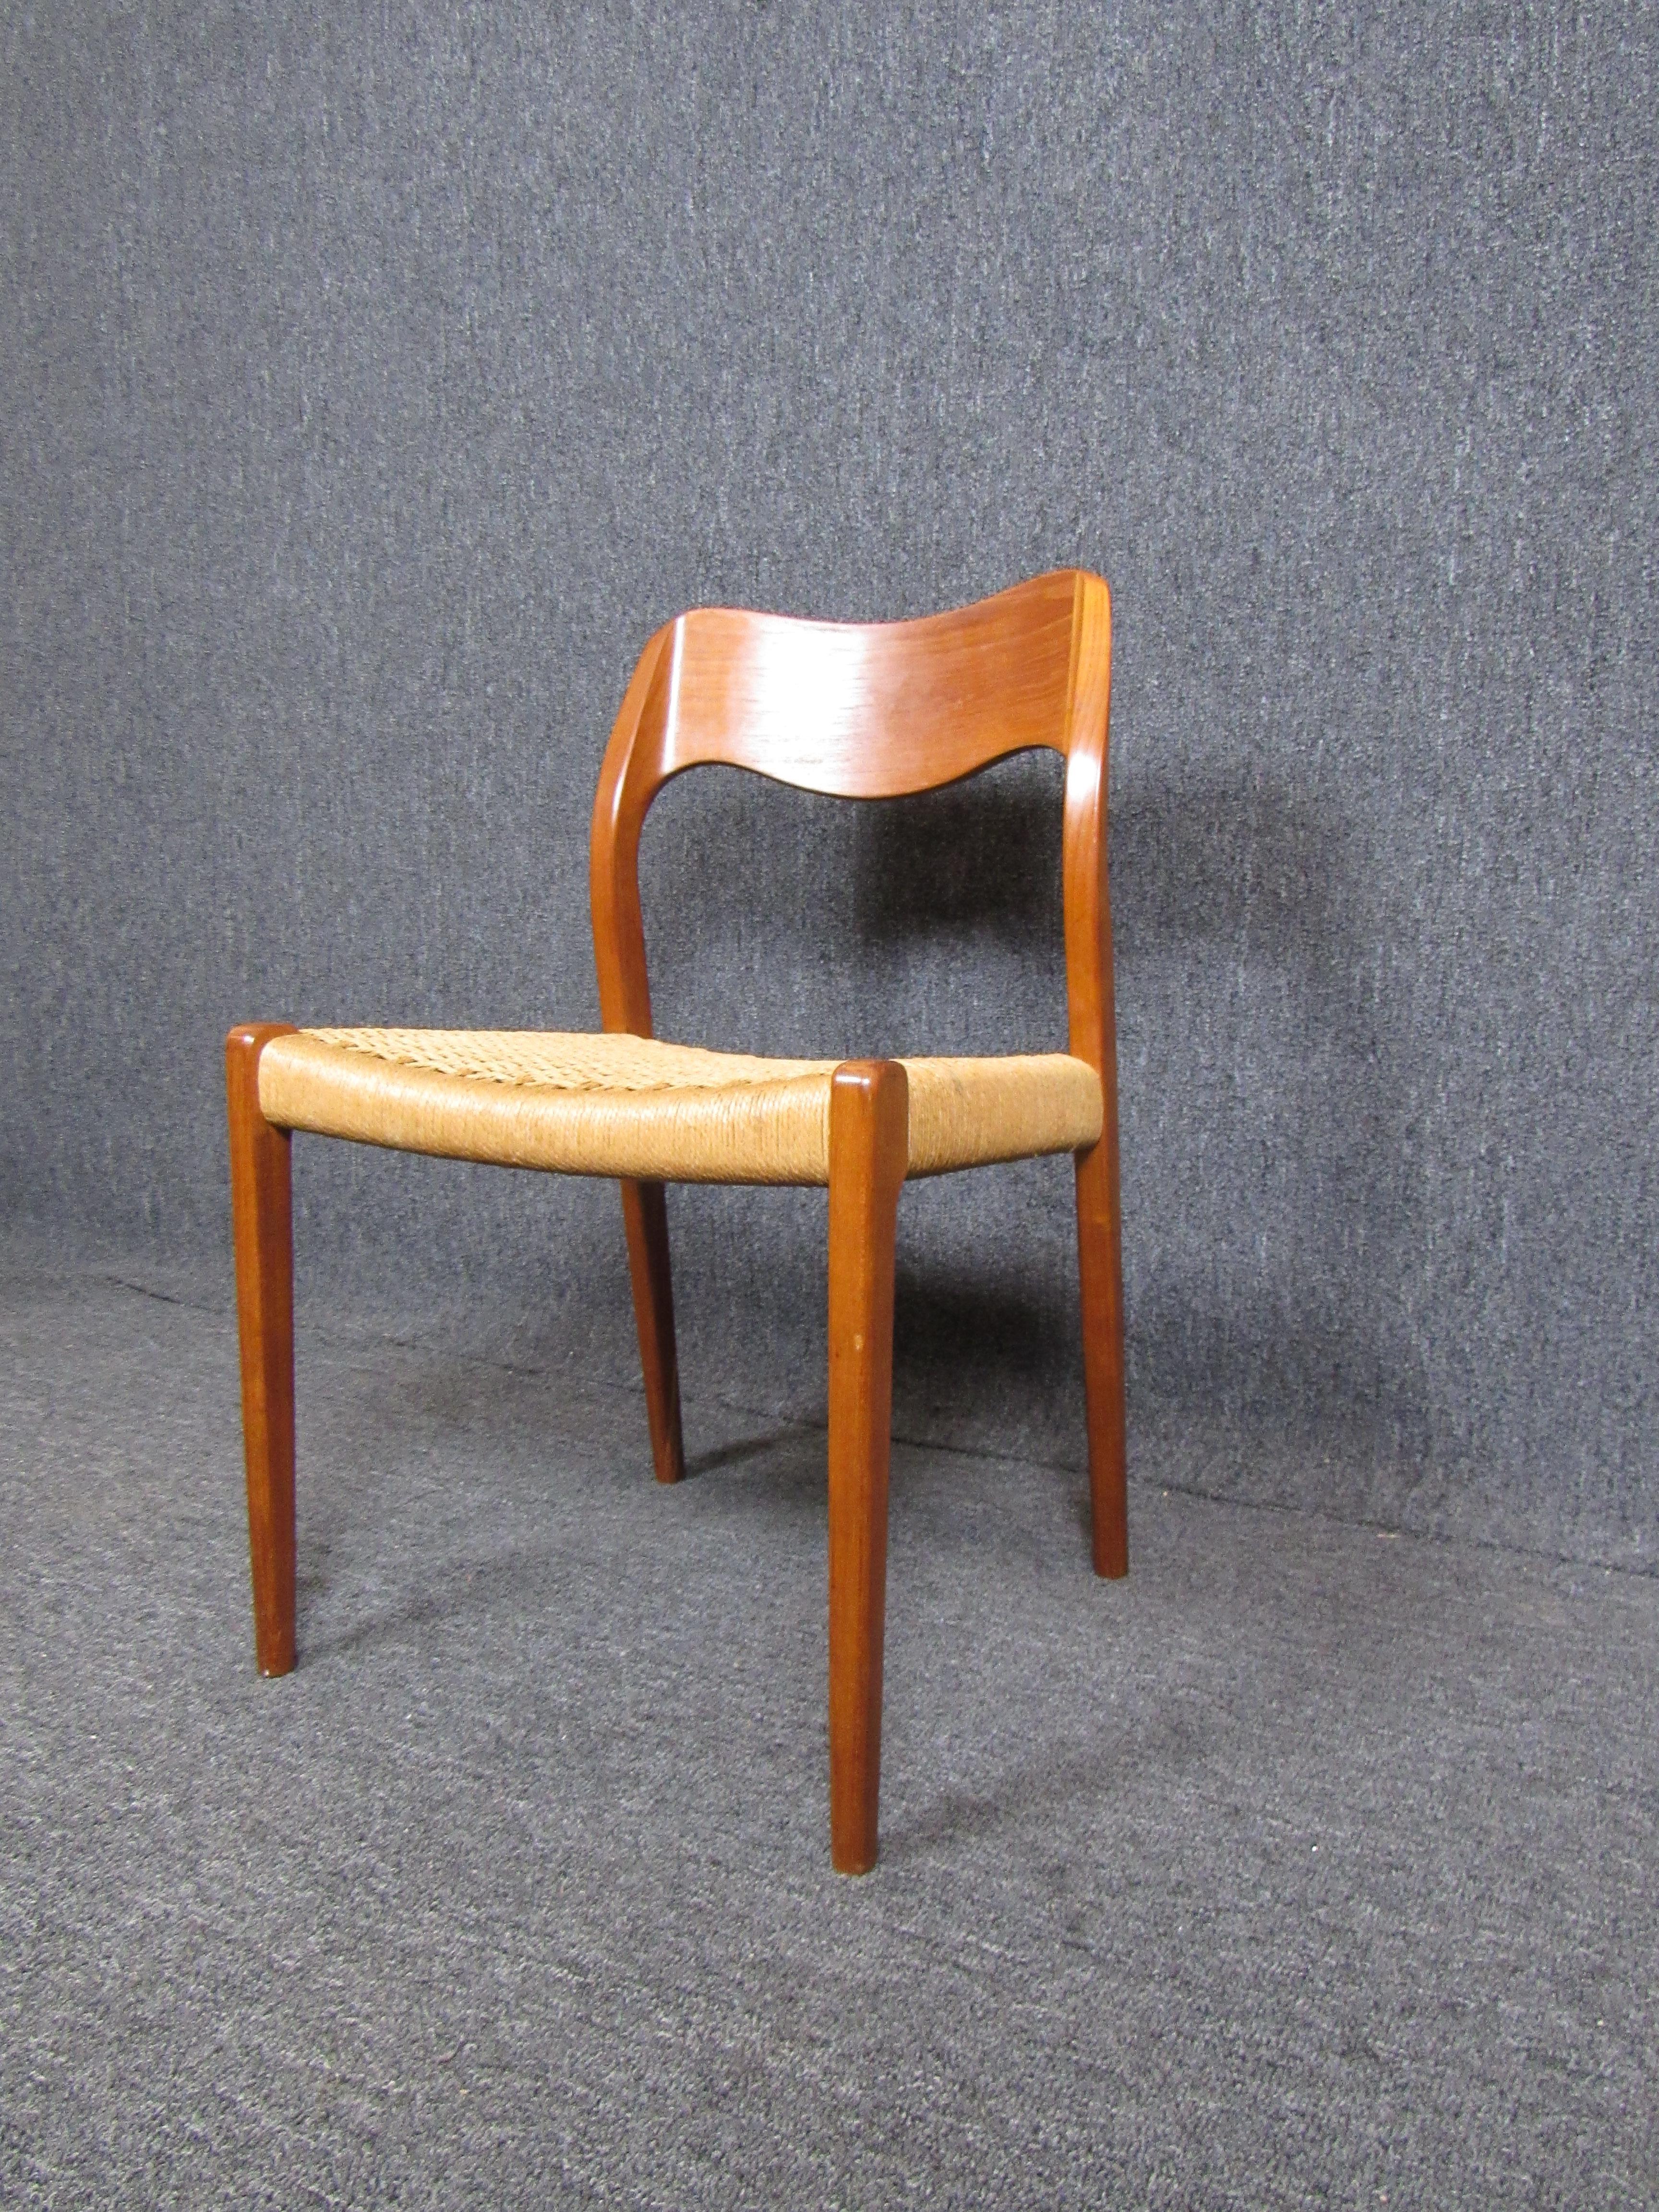 This elegant vintage chair can add a touch of Mid-Century Modern style to any space, with a woven papercord seat and sculpted teak frame. Moller furniture is made by a company founded in 1944 by Niels Otto Moller.

Please confirm item location with